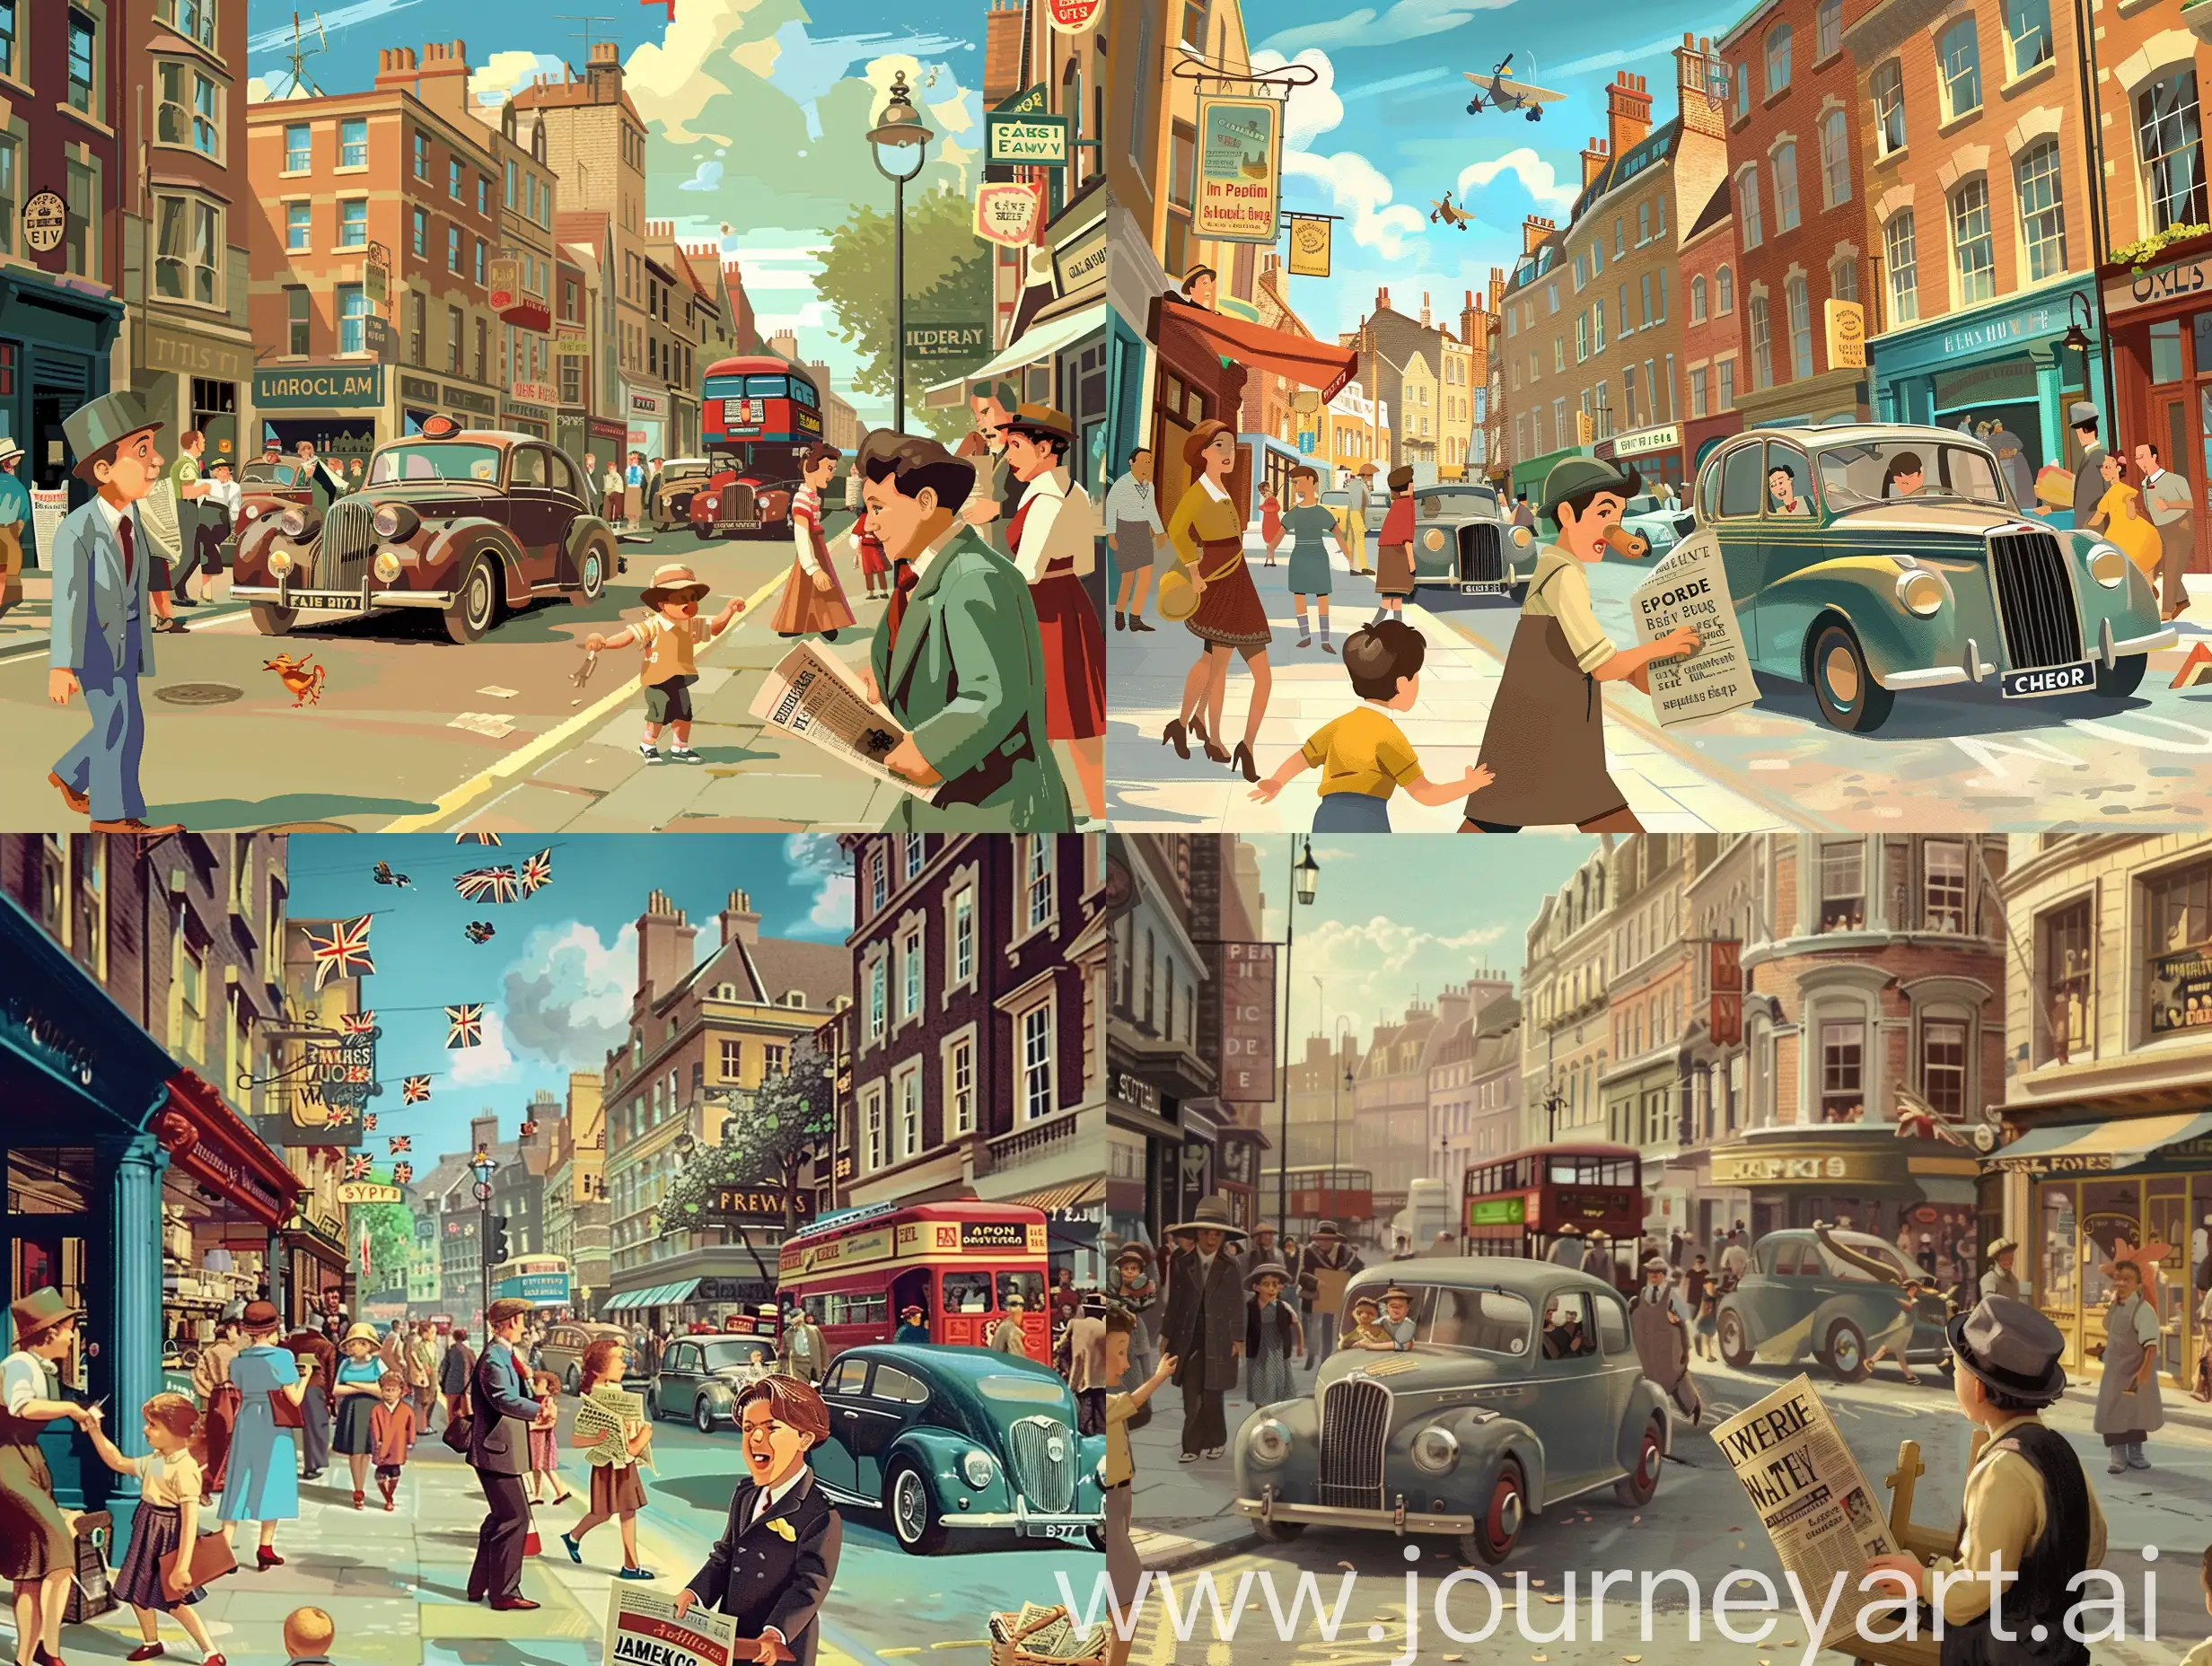 Vibrant-1940s-London-Street-Scene-with-Playful-Children-and-Animated-Newspaper-Crier